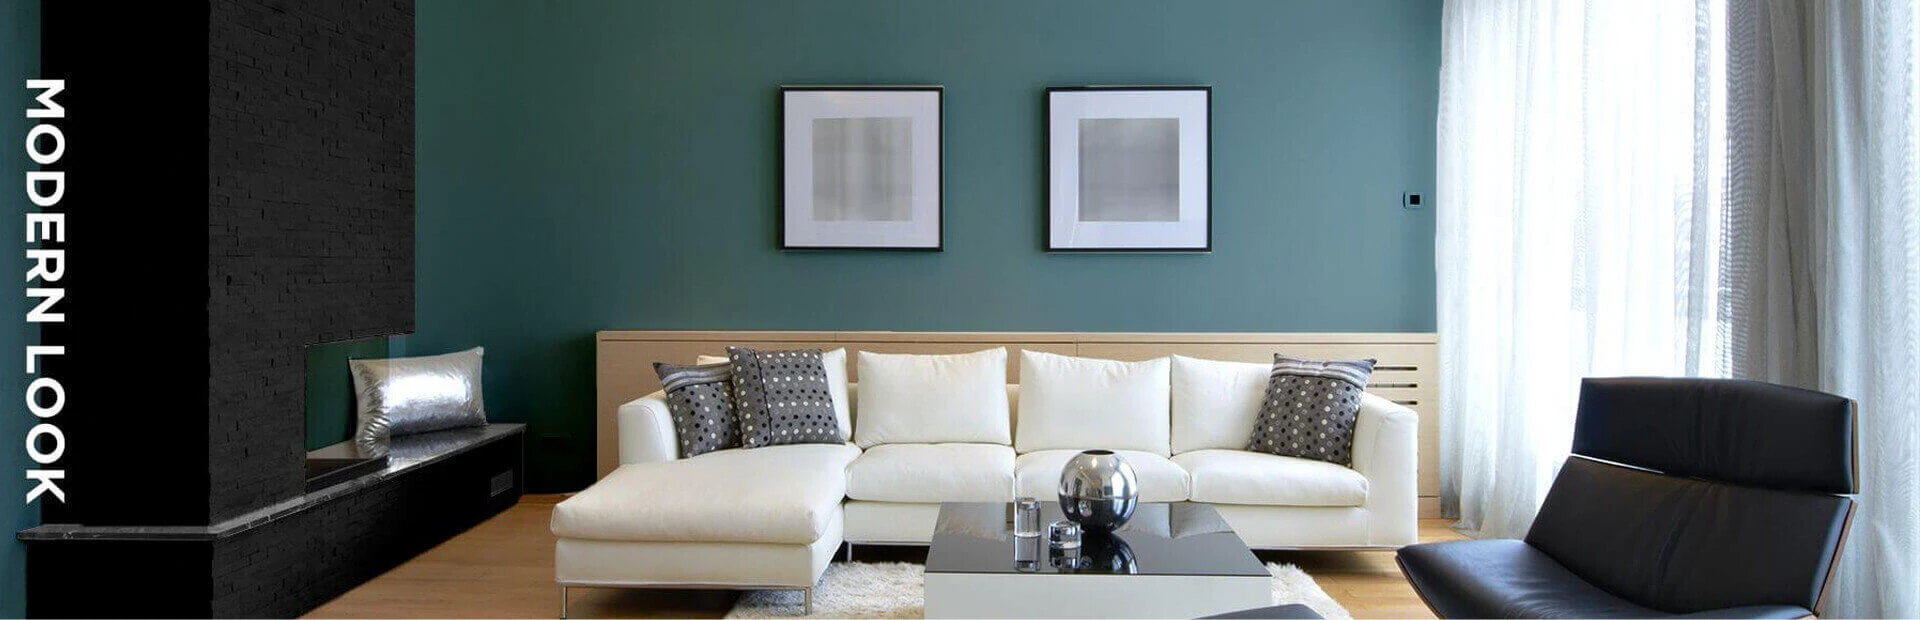 Living room with black, beige and green colour scheme.